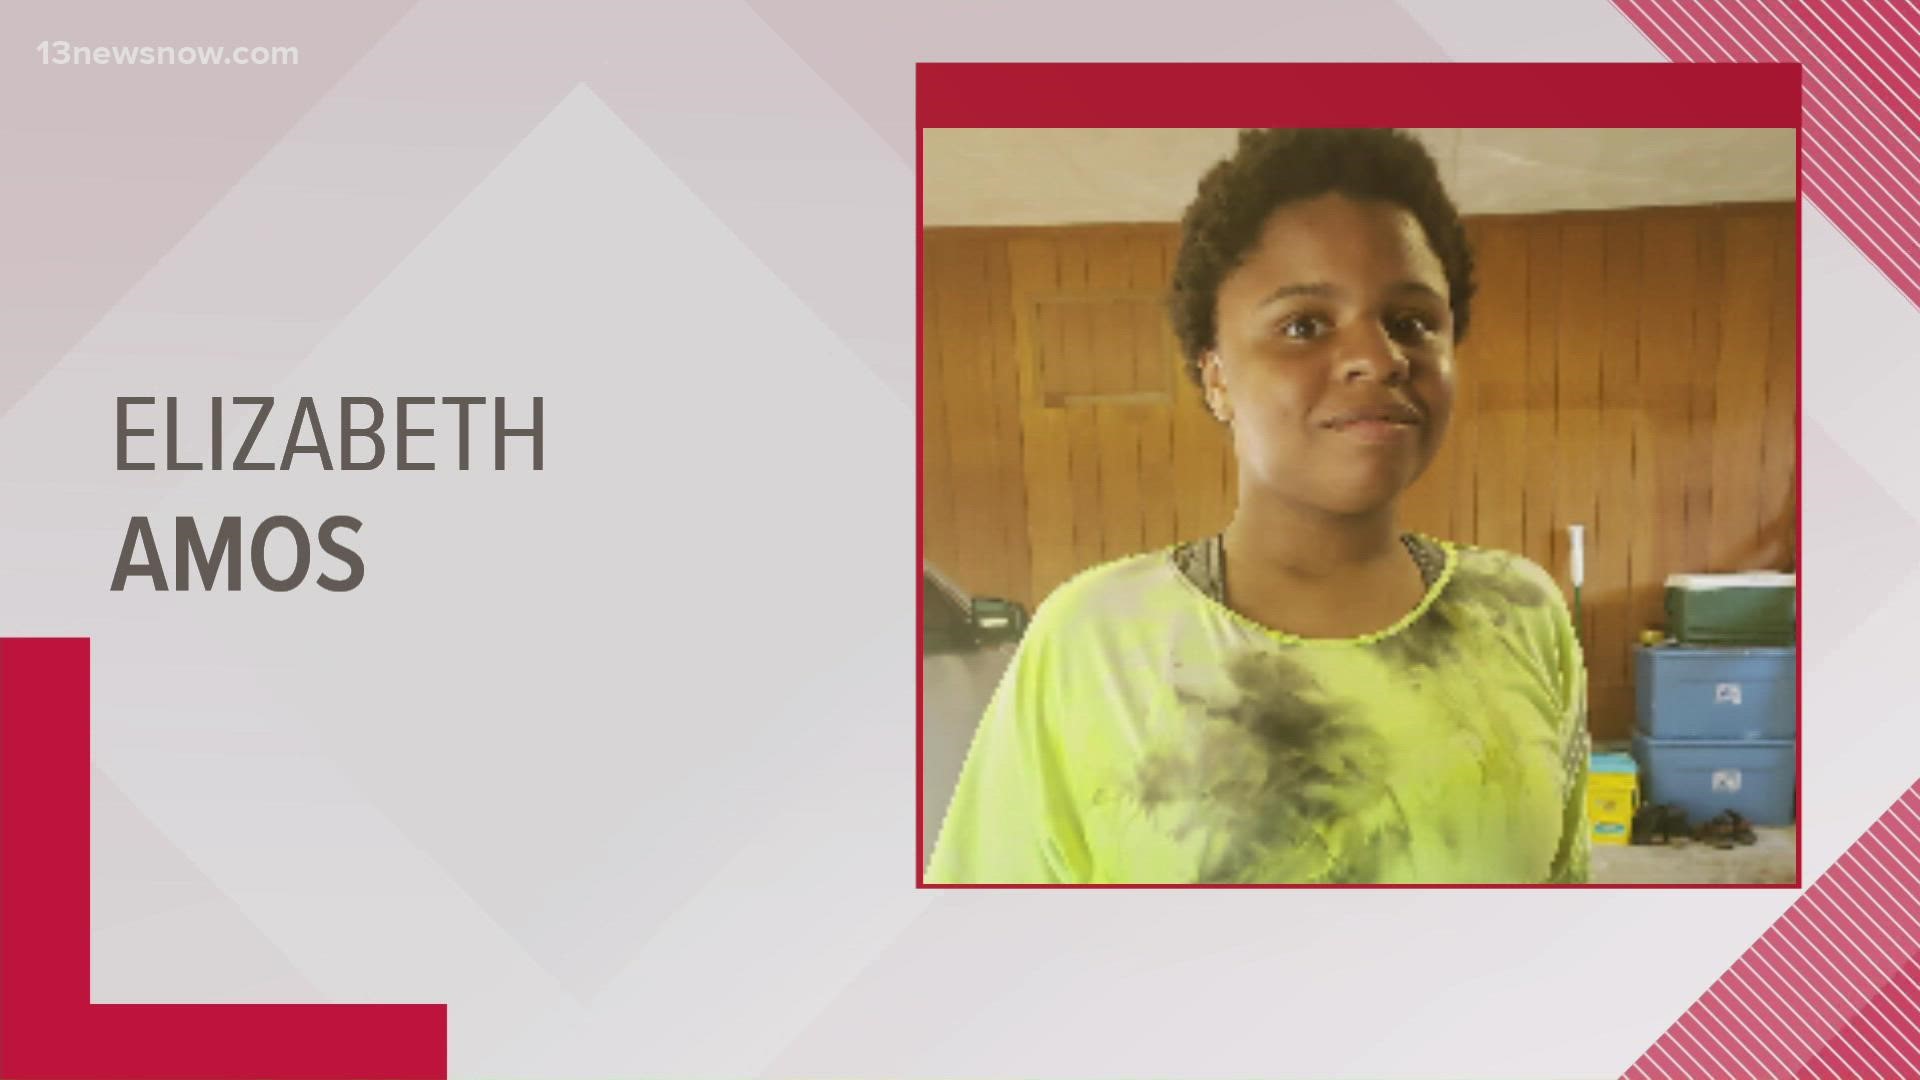 Elizabeth Amos hasn't been seen since Friday. If you see her, call police.